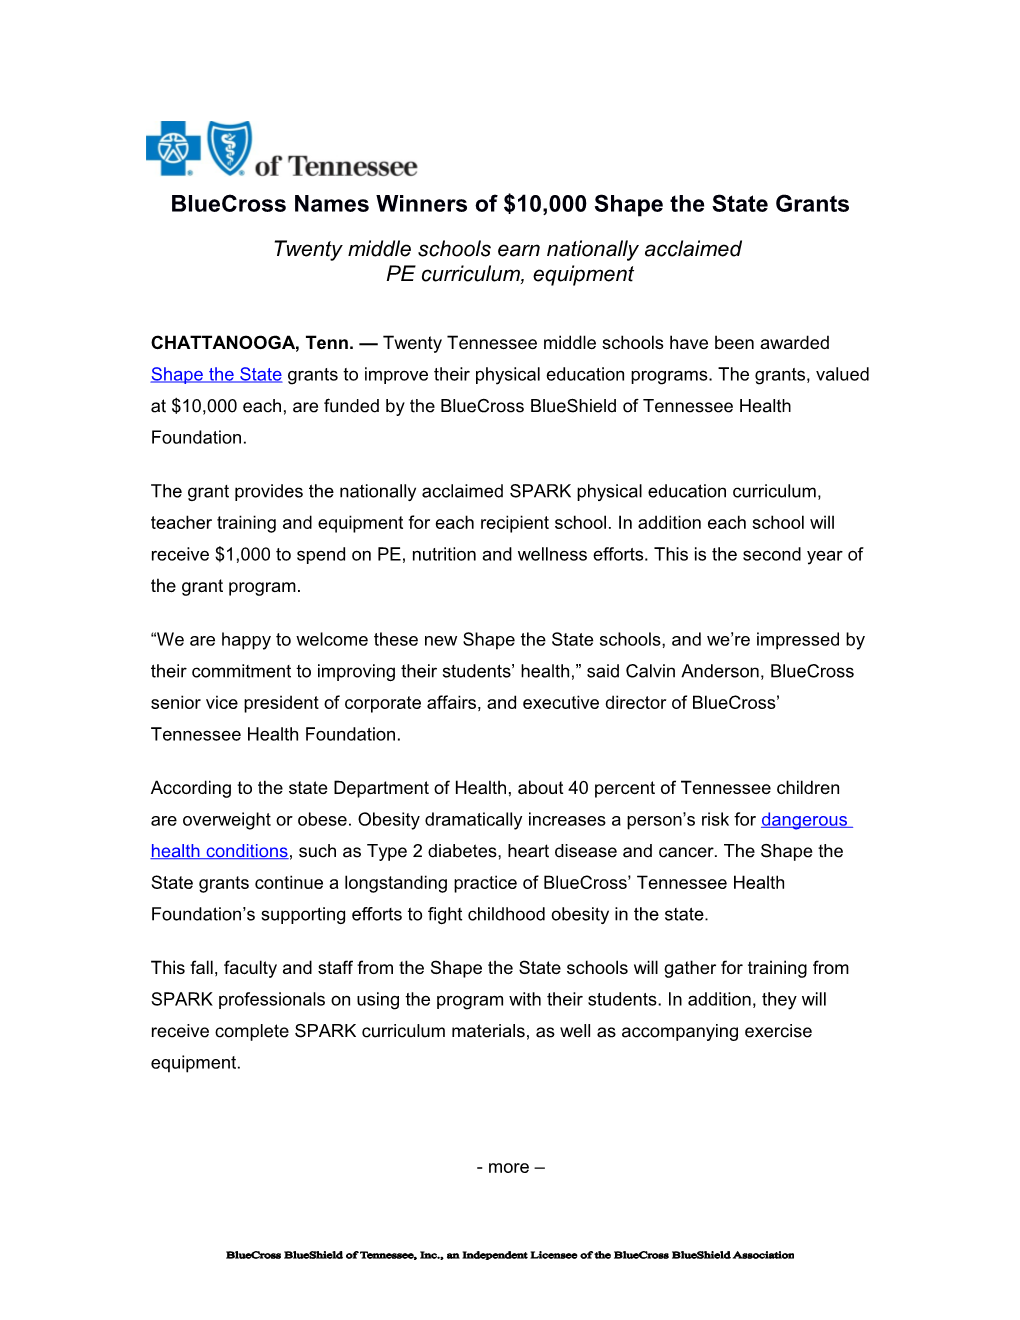 Bluecross Names Winners of $10,000 Shape the State Grants